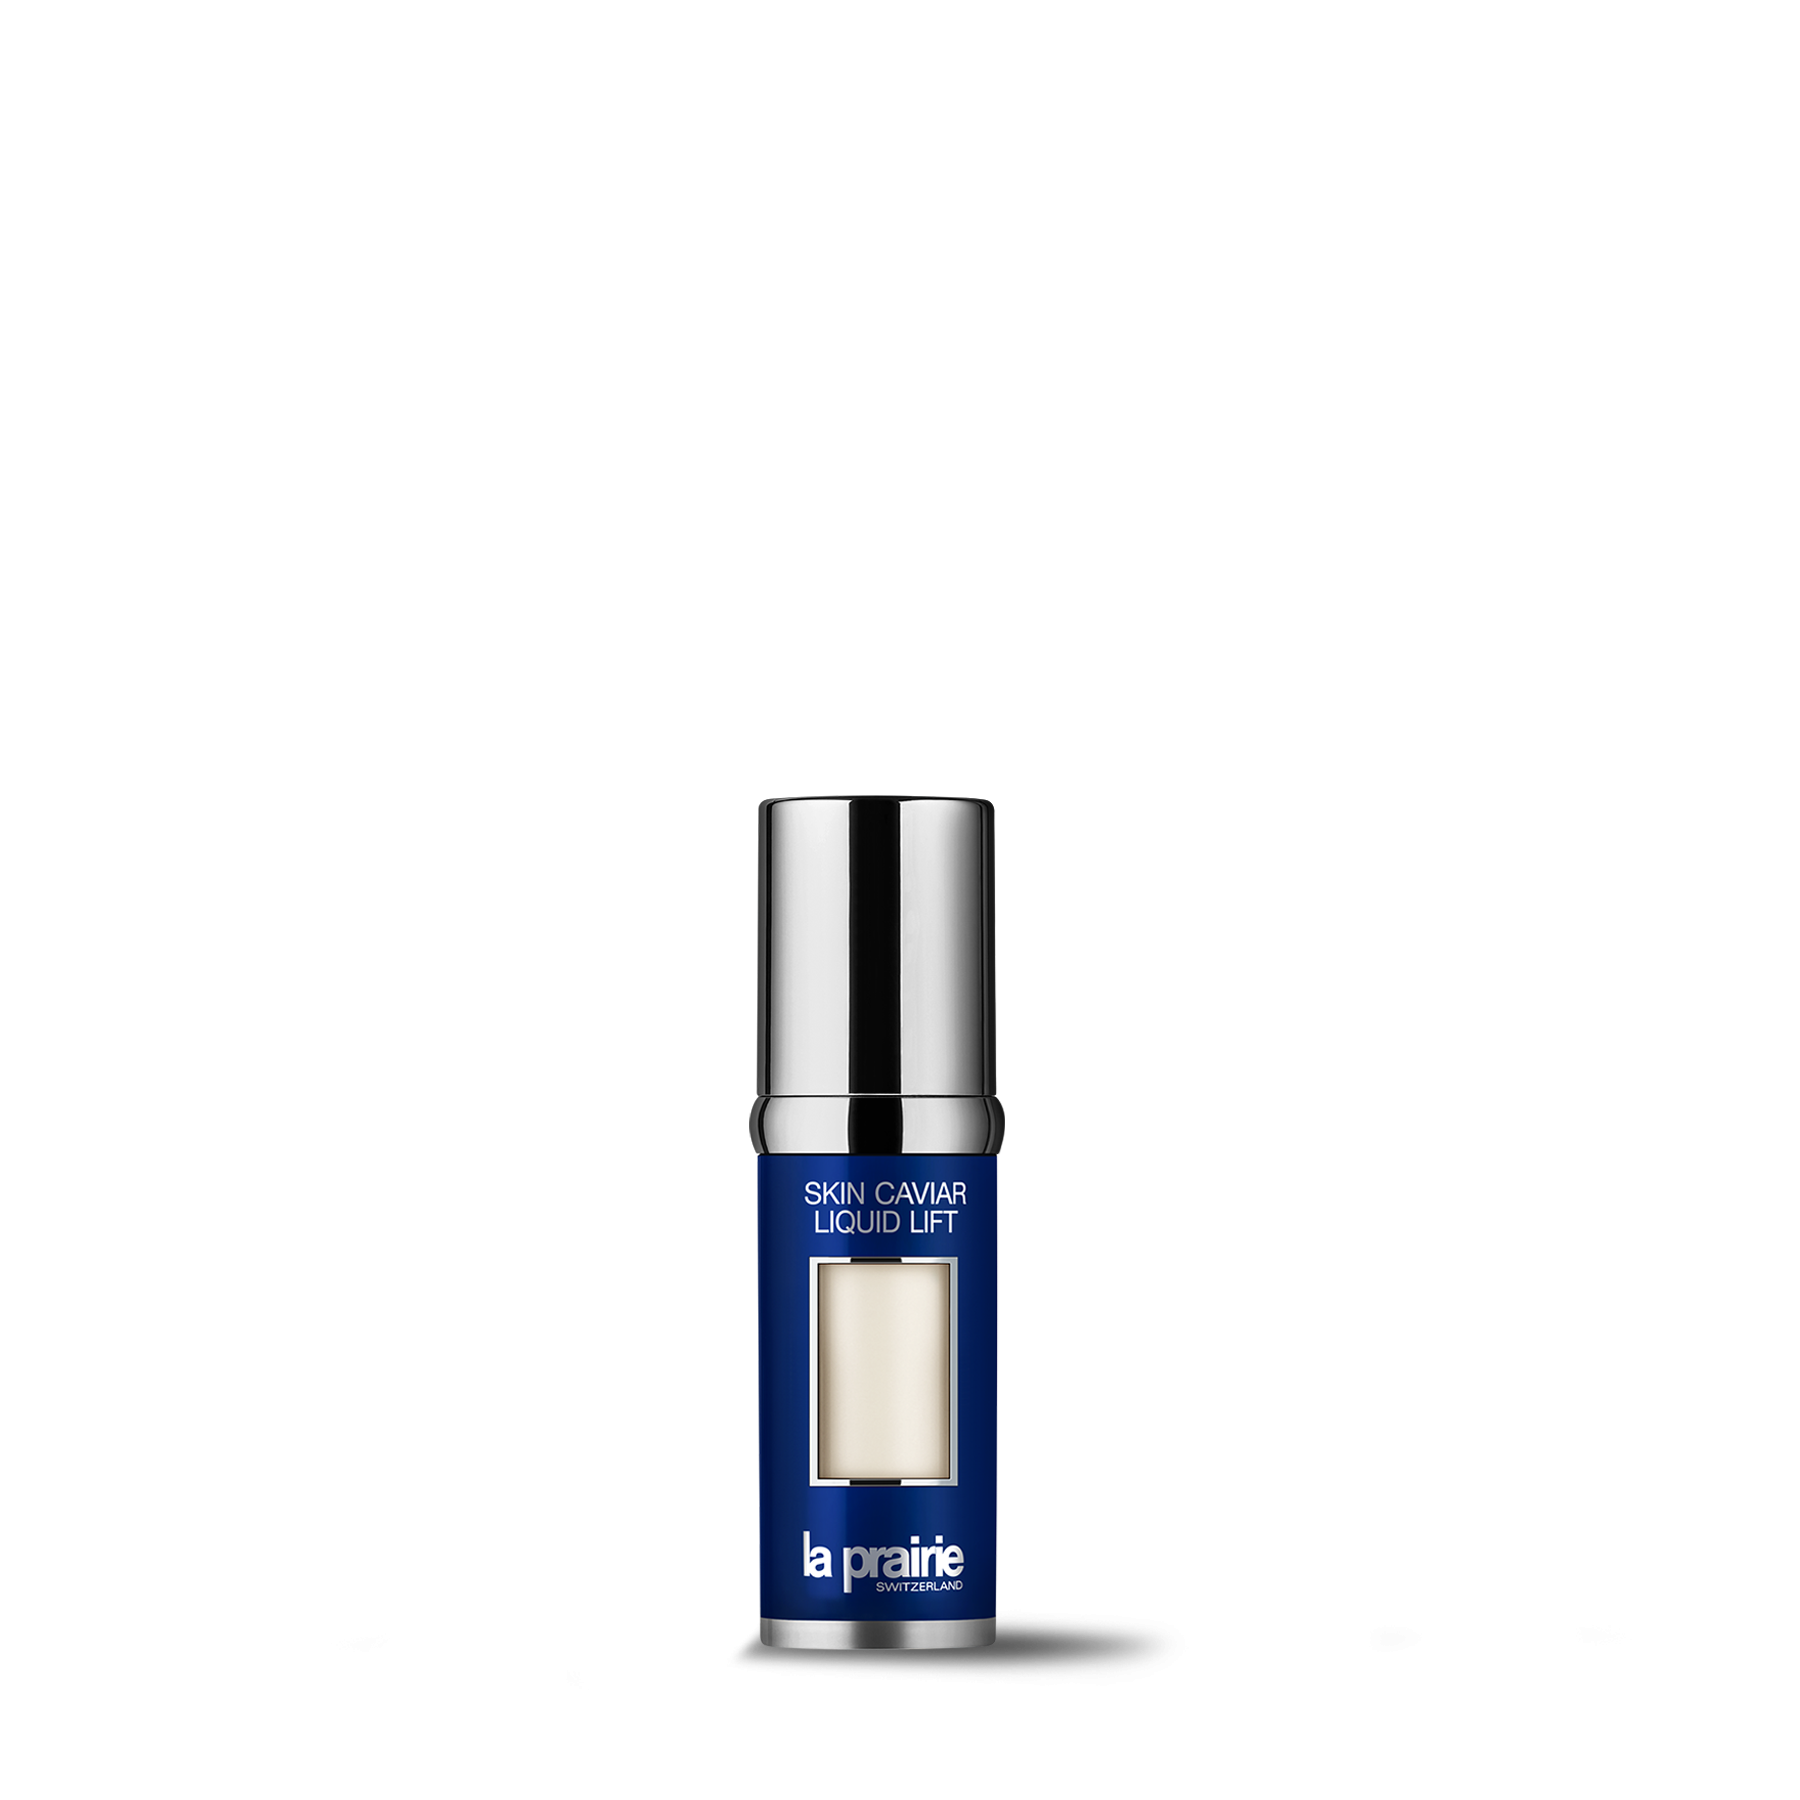 Spend €300 in La Prairie and receive a free gift